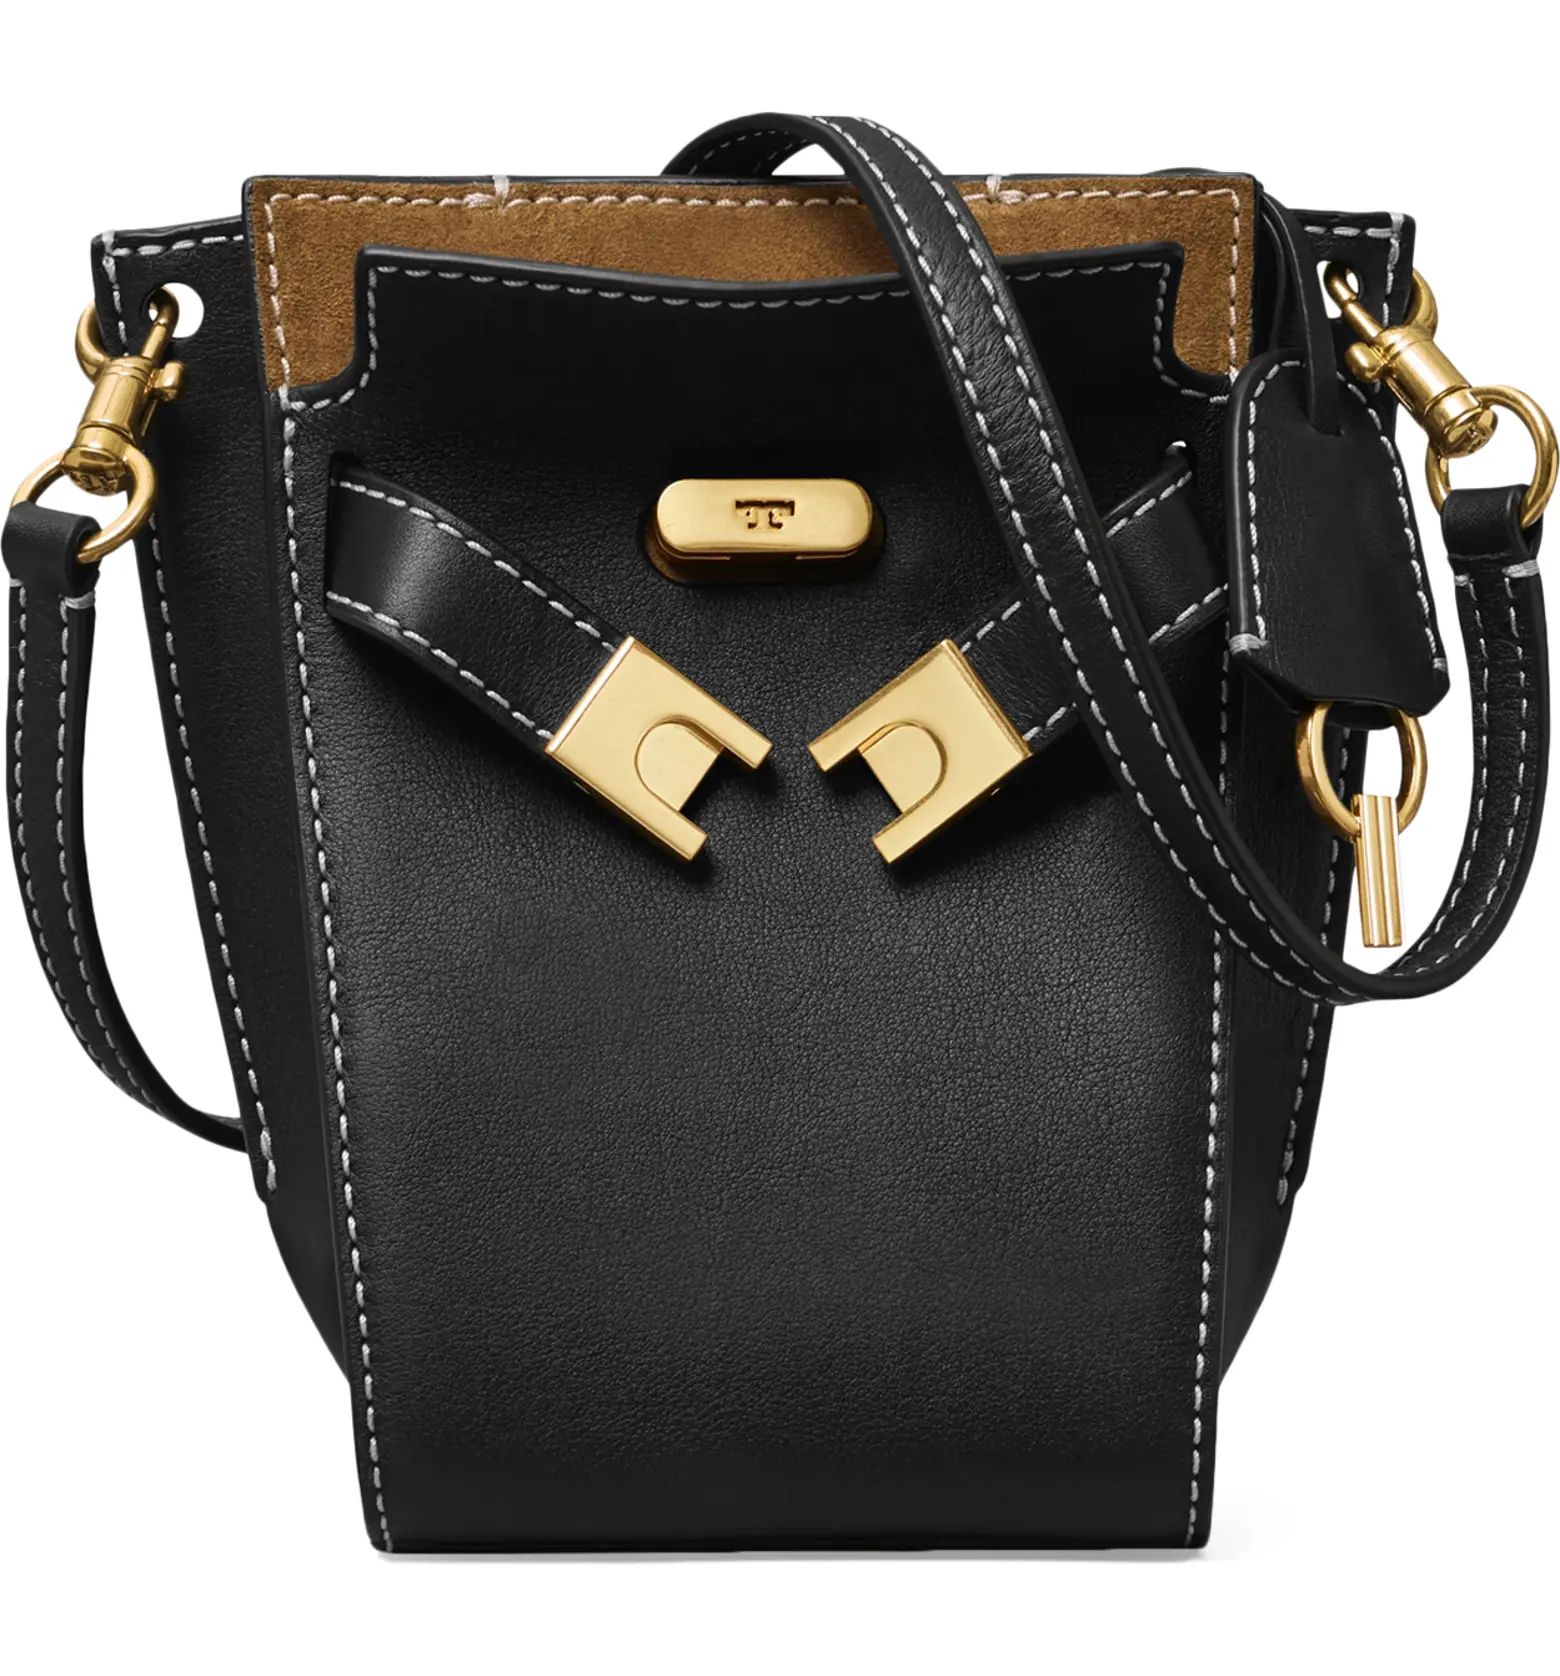 Tory Burch Petite Lee Radziwill Leather Double Bucket Bag | Nordstrom | Nordstrom